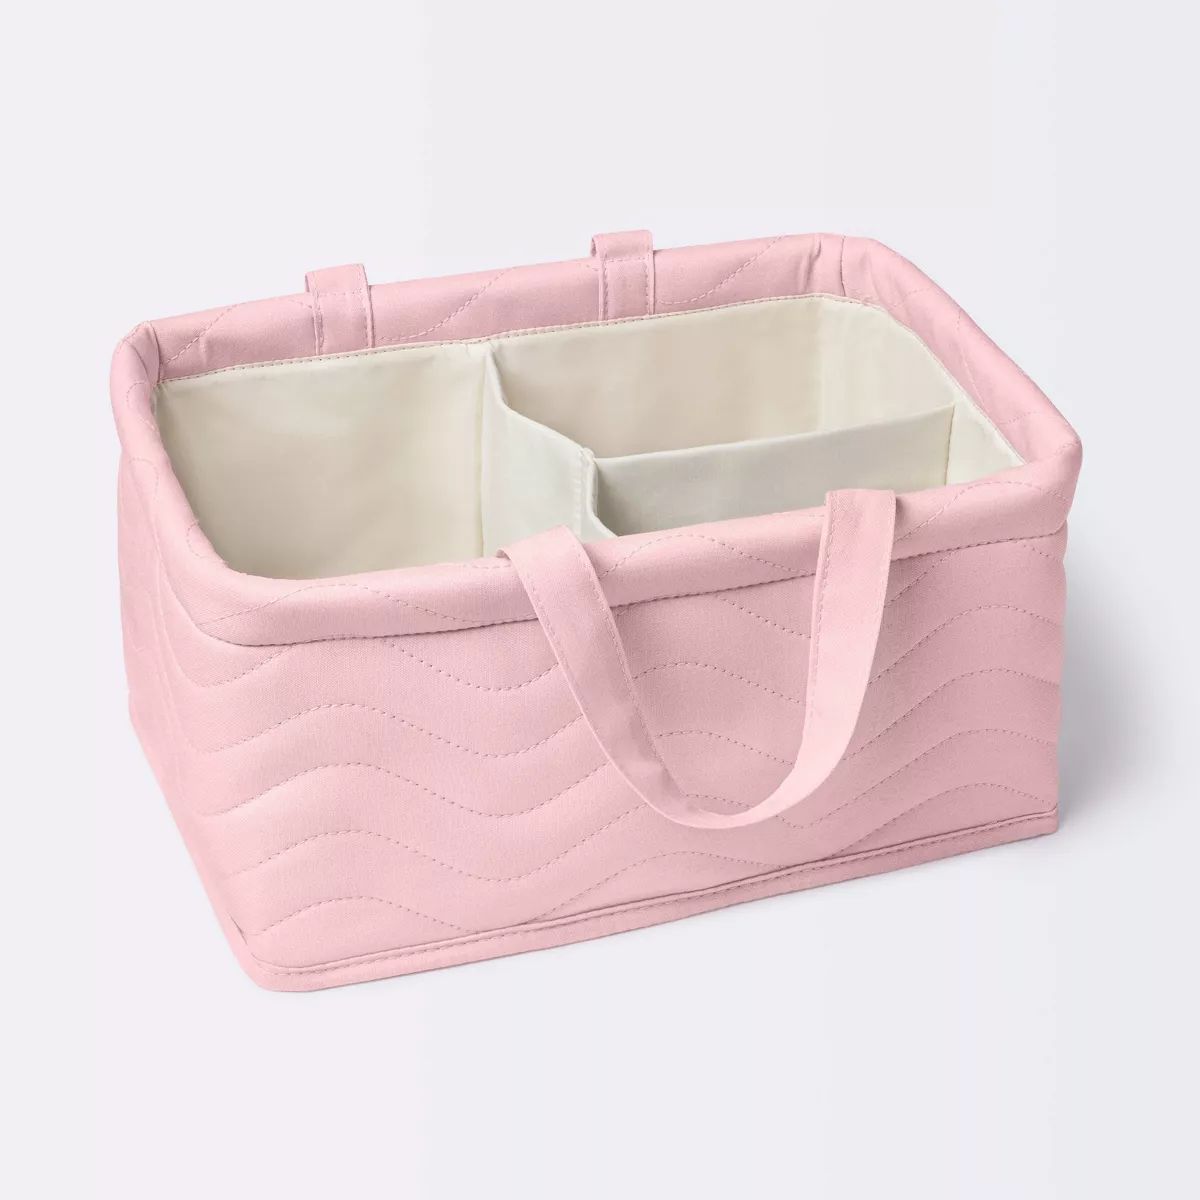 Quilted Fabric Diaper Caddy - Light Pink - Cloud Island™ | Target